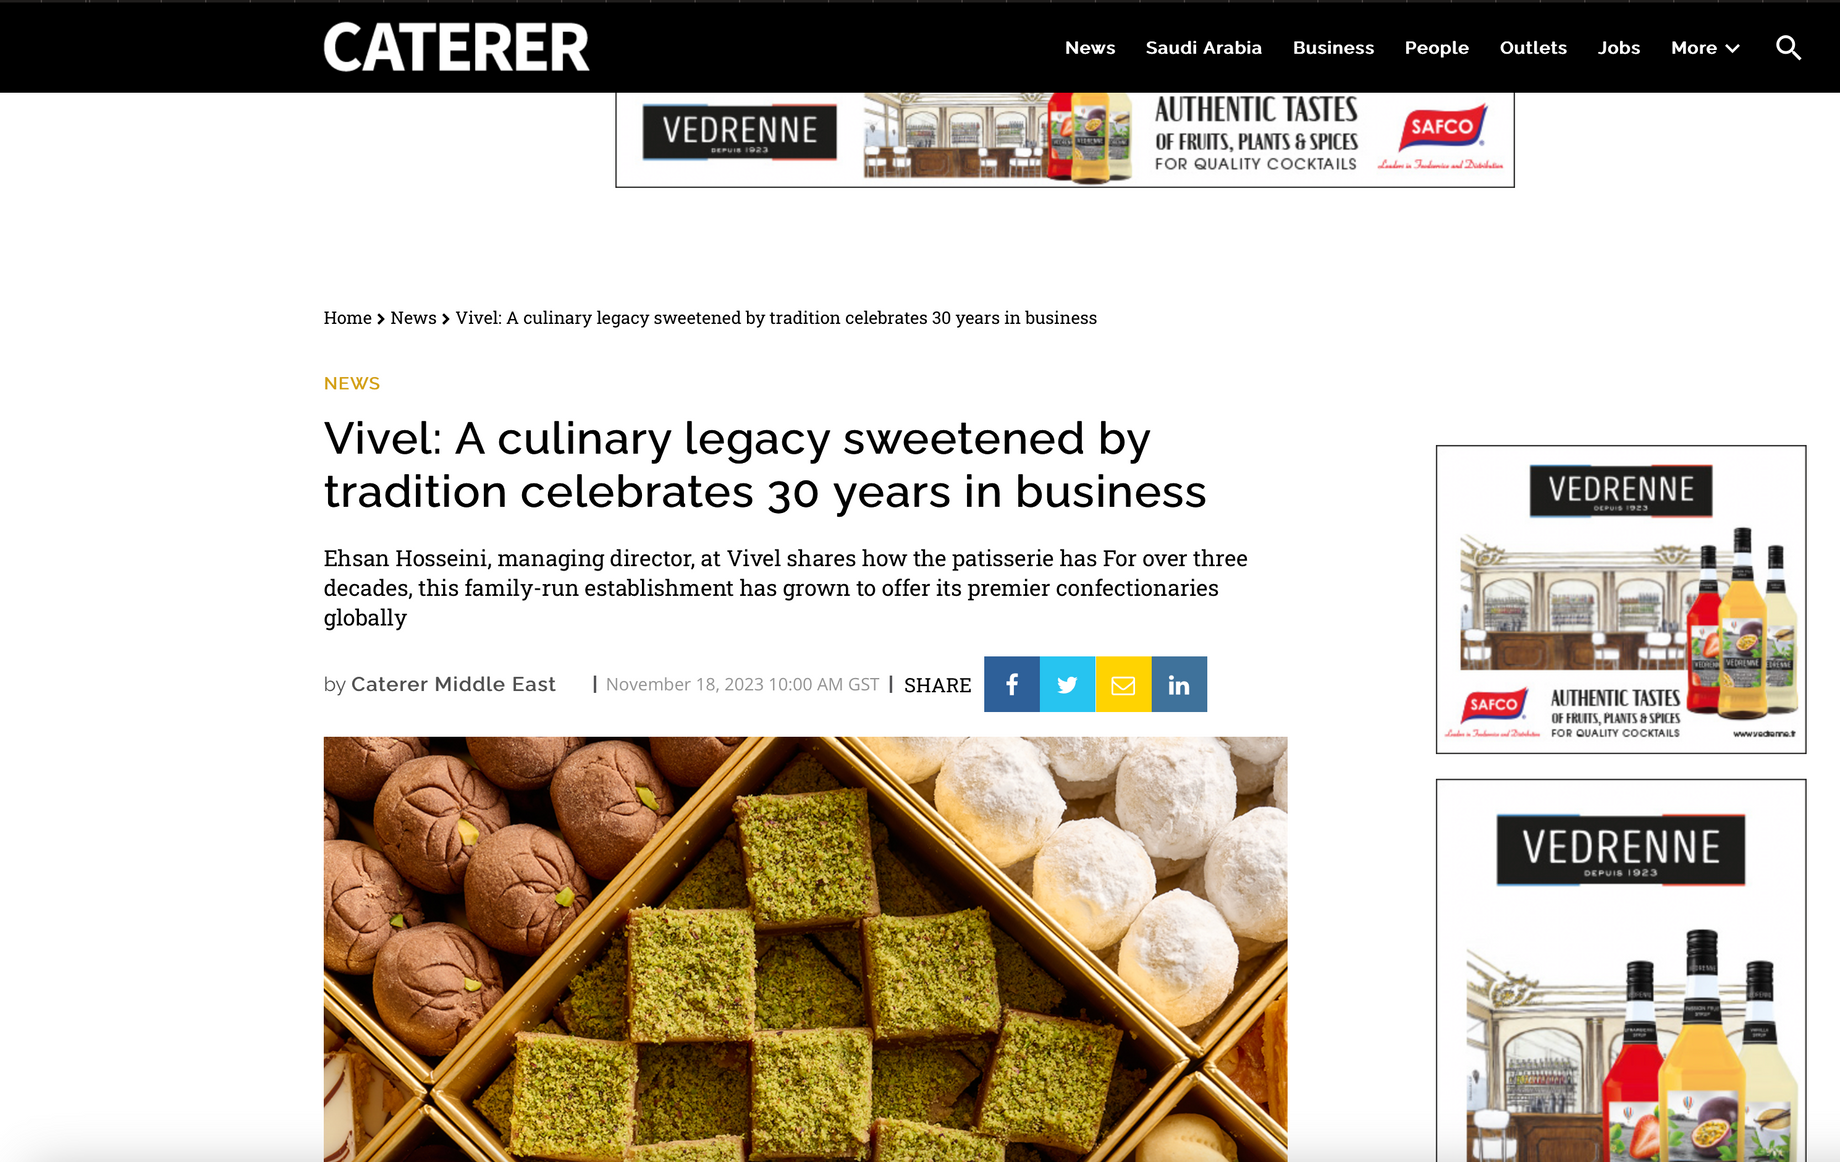 CATERER MIDDLE EAST- A culinary legacy sweetened by tradition celebrates 30 years in business